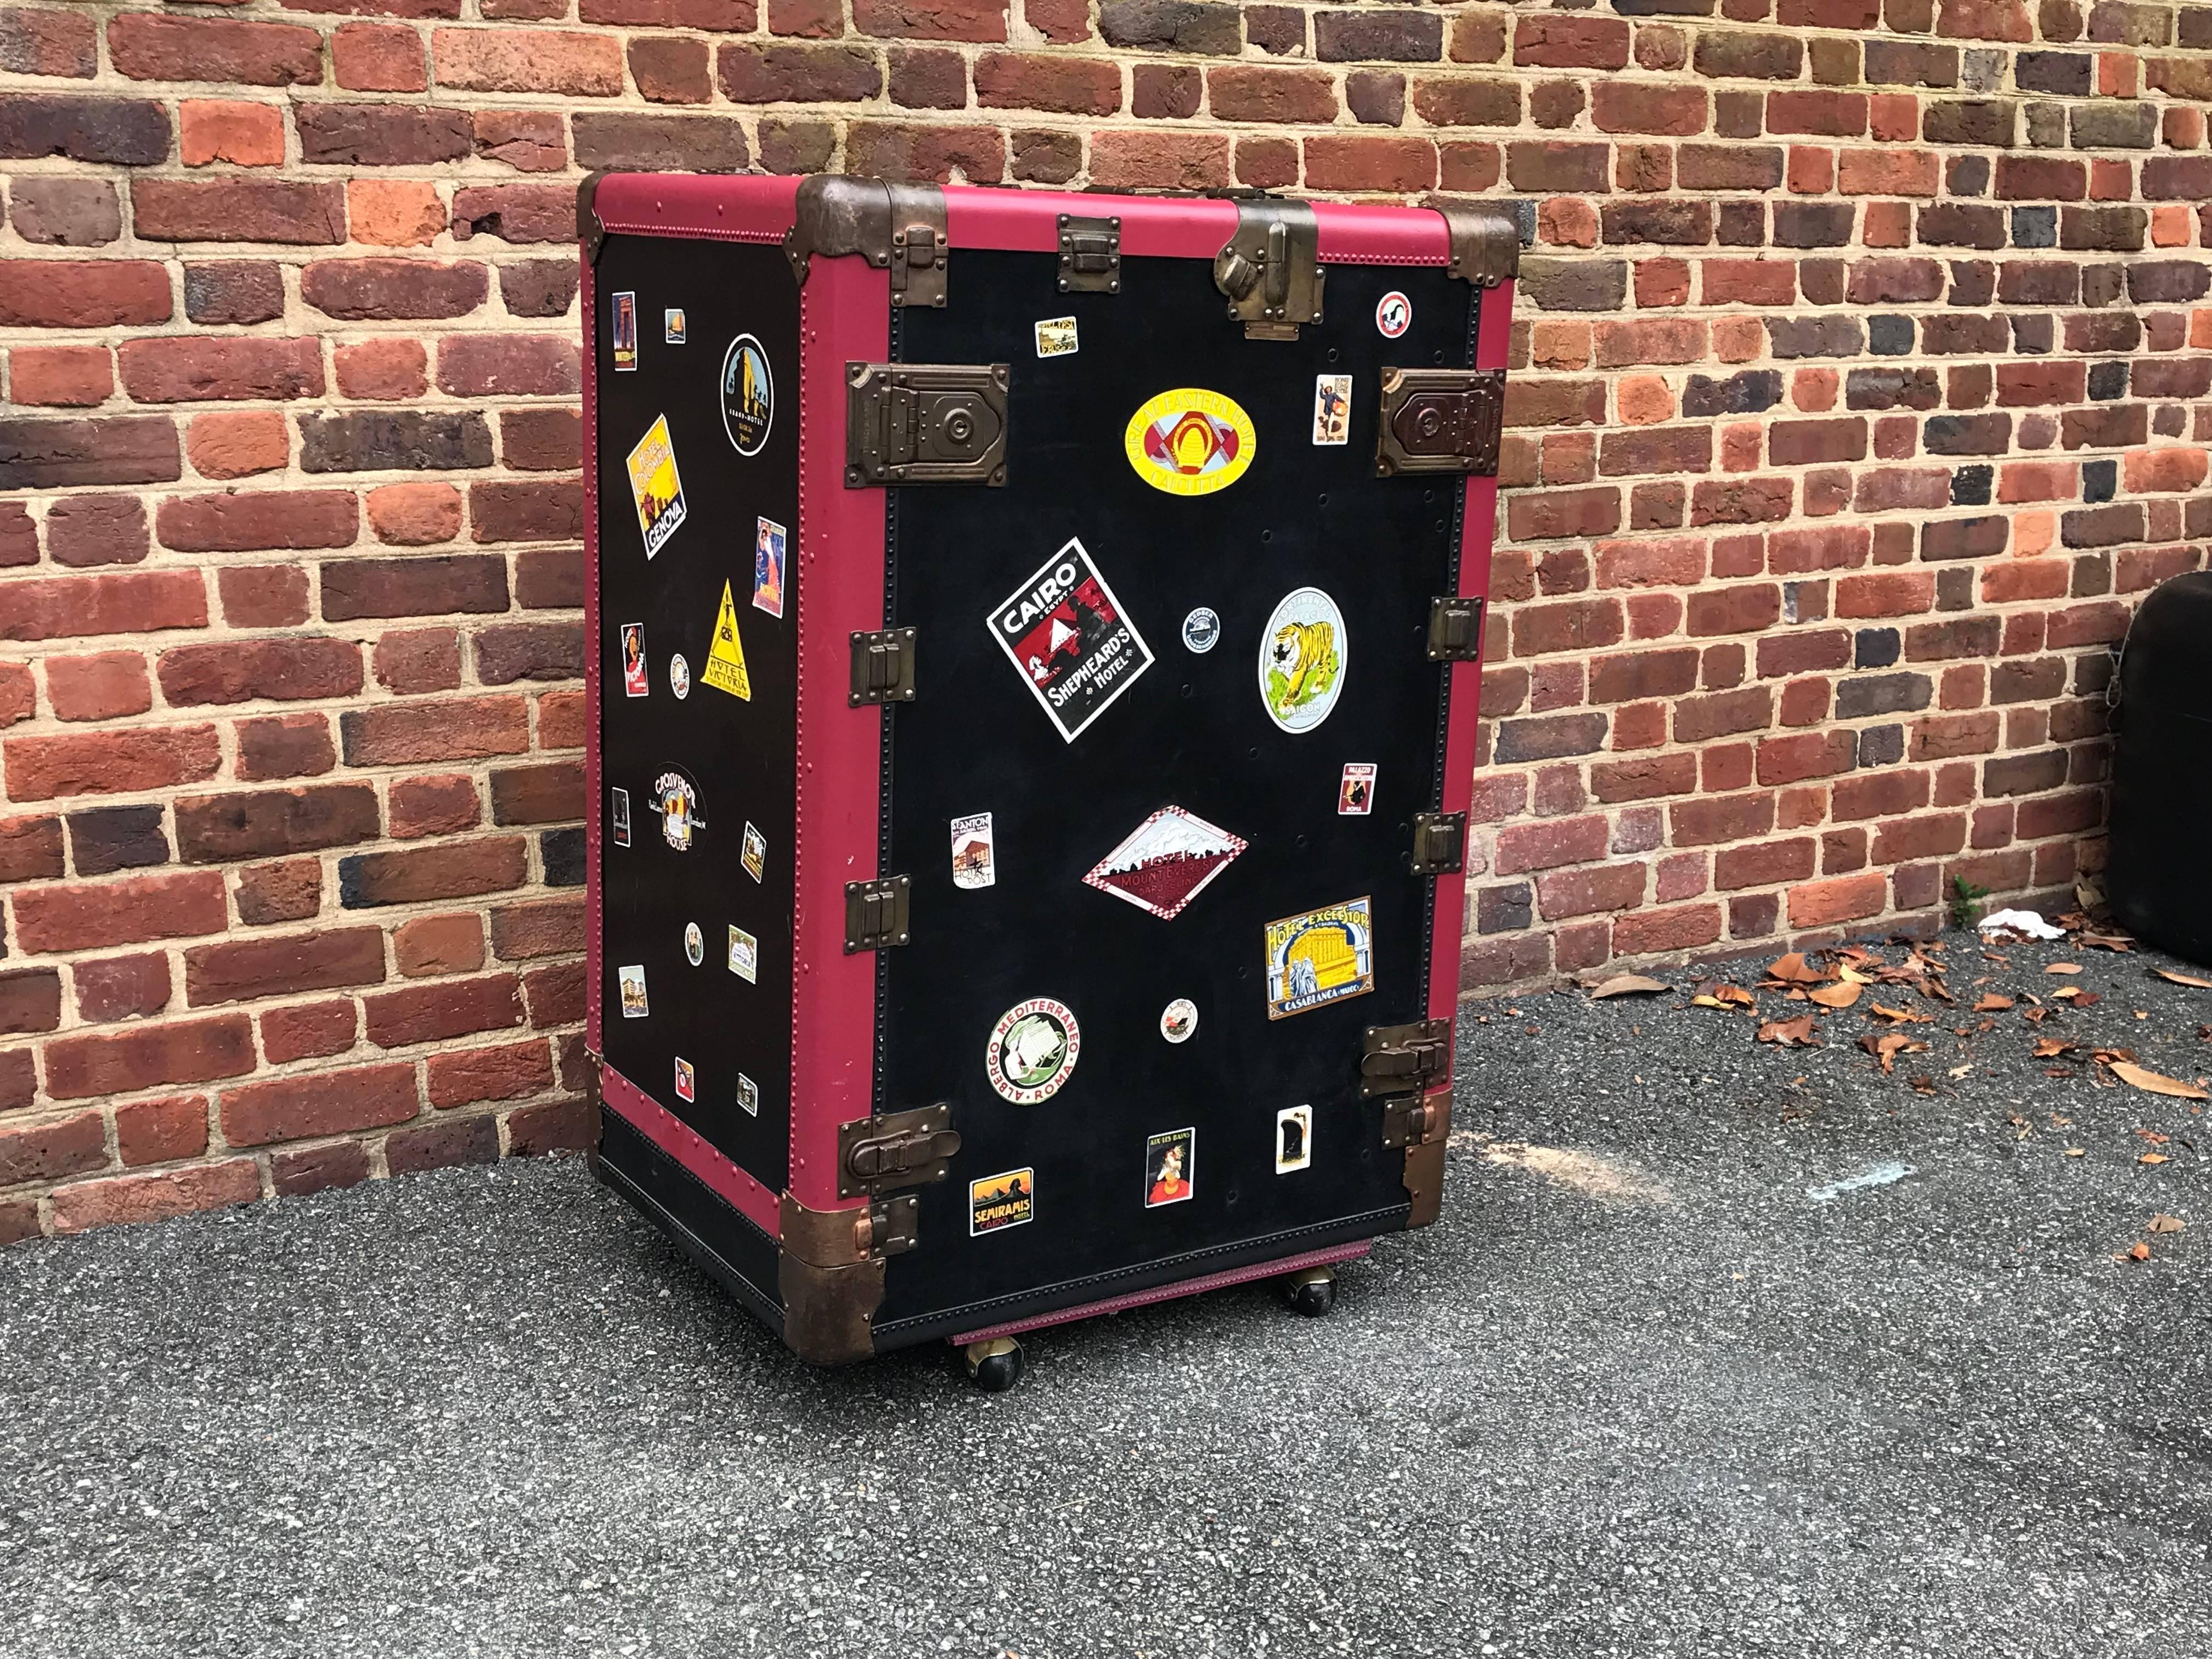 Offered is a gorgeous, 1930s, Hartmann Trunk Co. turn table leather steamer trunk, from the Pathfinder collection for Saks Fifth Avenue. Left side opens to hanging bar. Right side opens to drawers. Exterior has been covered in stickers from